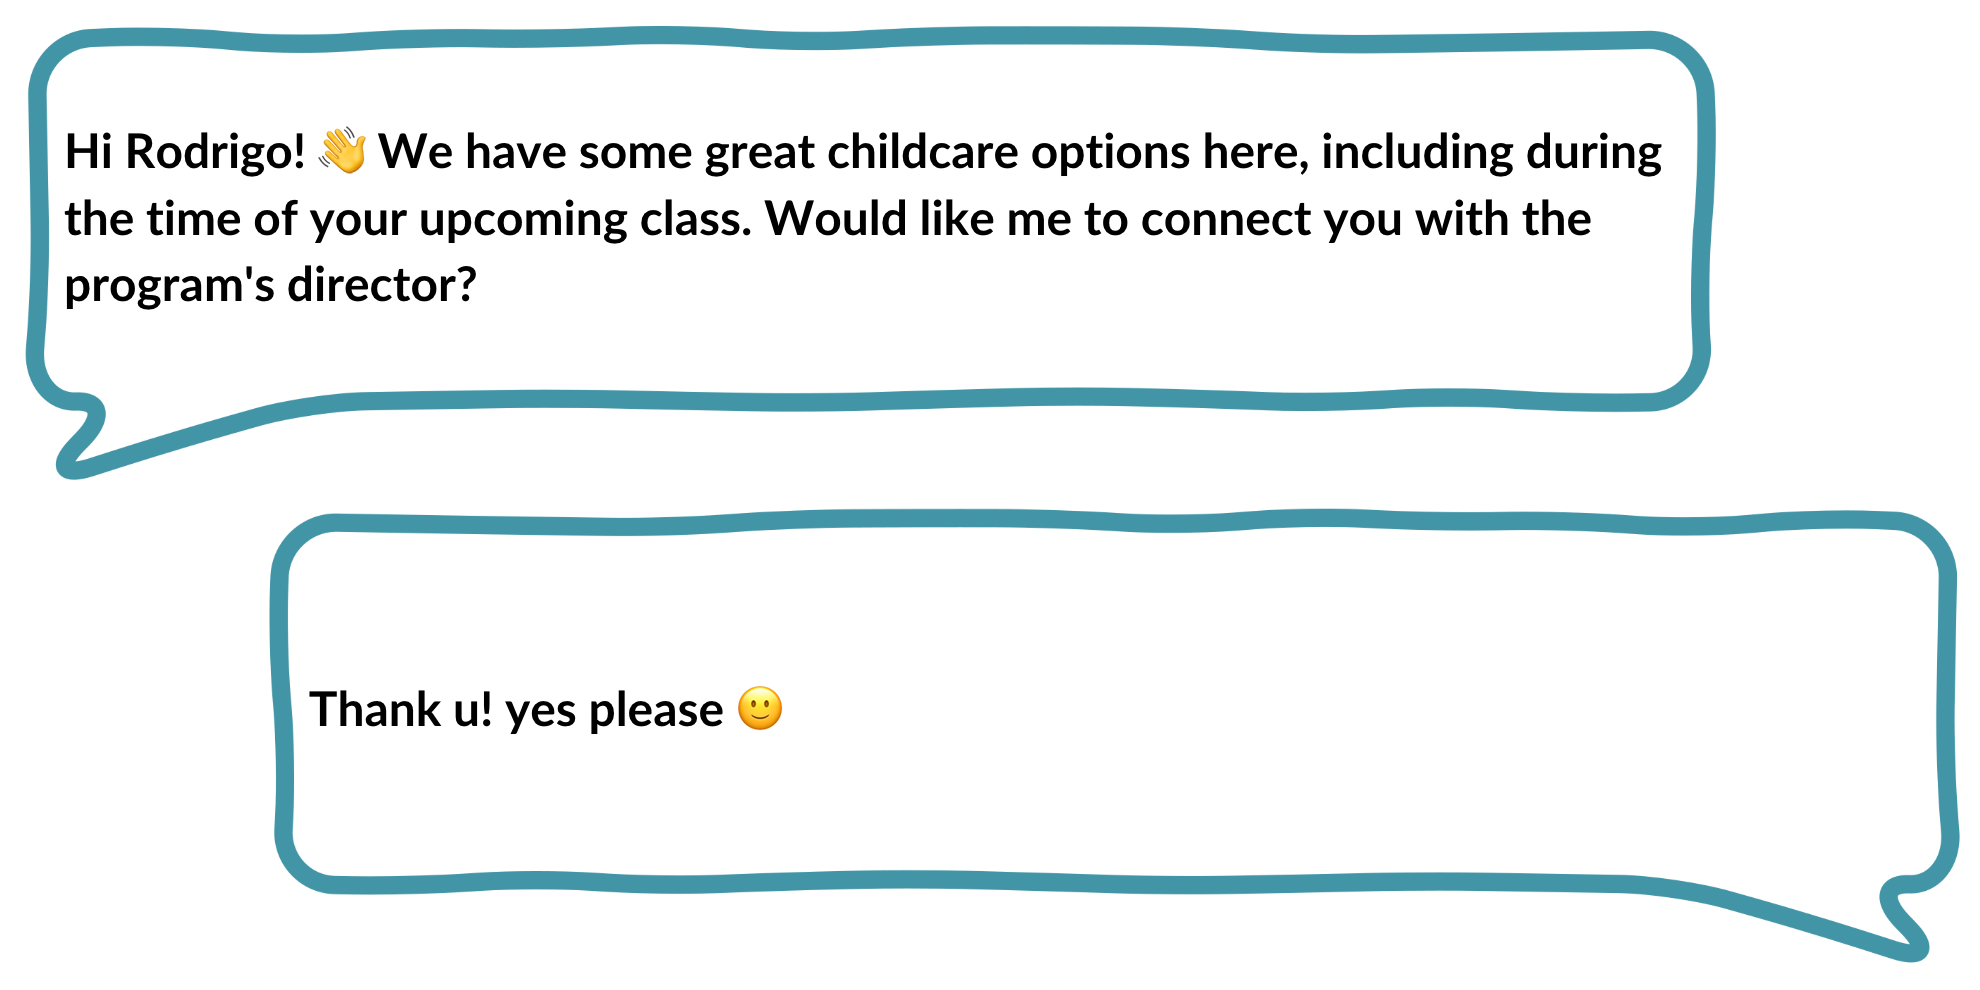 two text bubbles - the first says "Hi Rodrigo! We have some great childcare options here, including during the time of your upcoming class. Would like me to connect you with the program's director?" and the second says "thank u yes please"